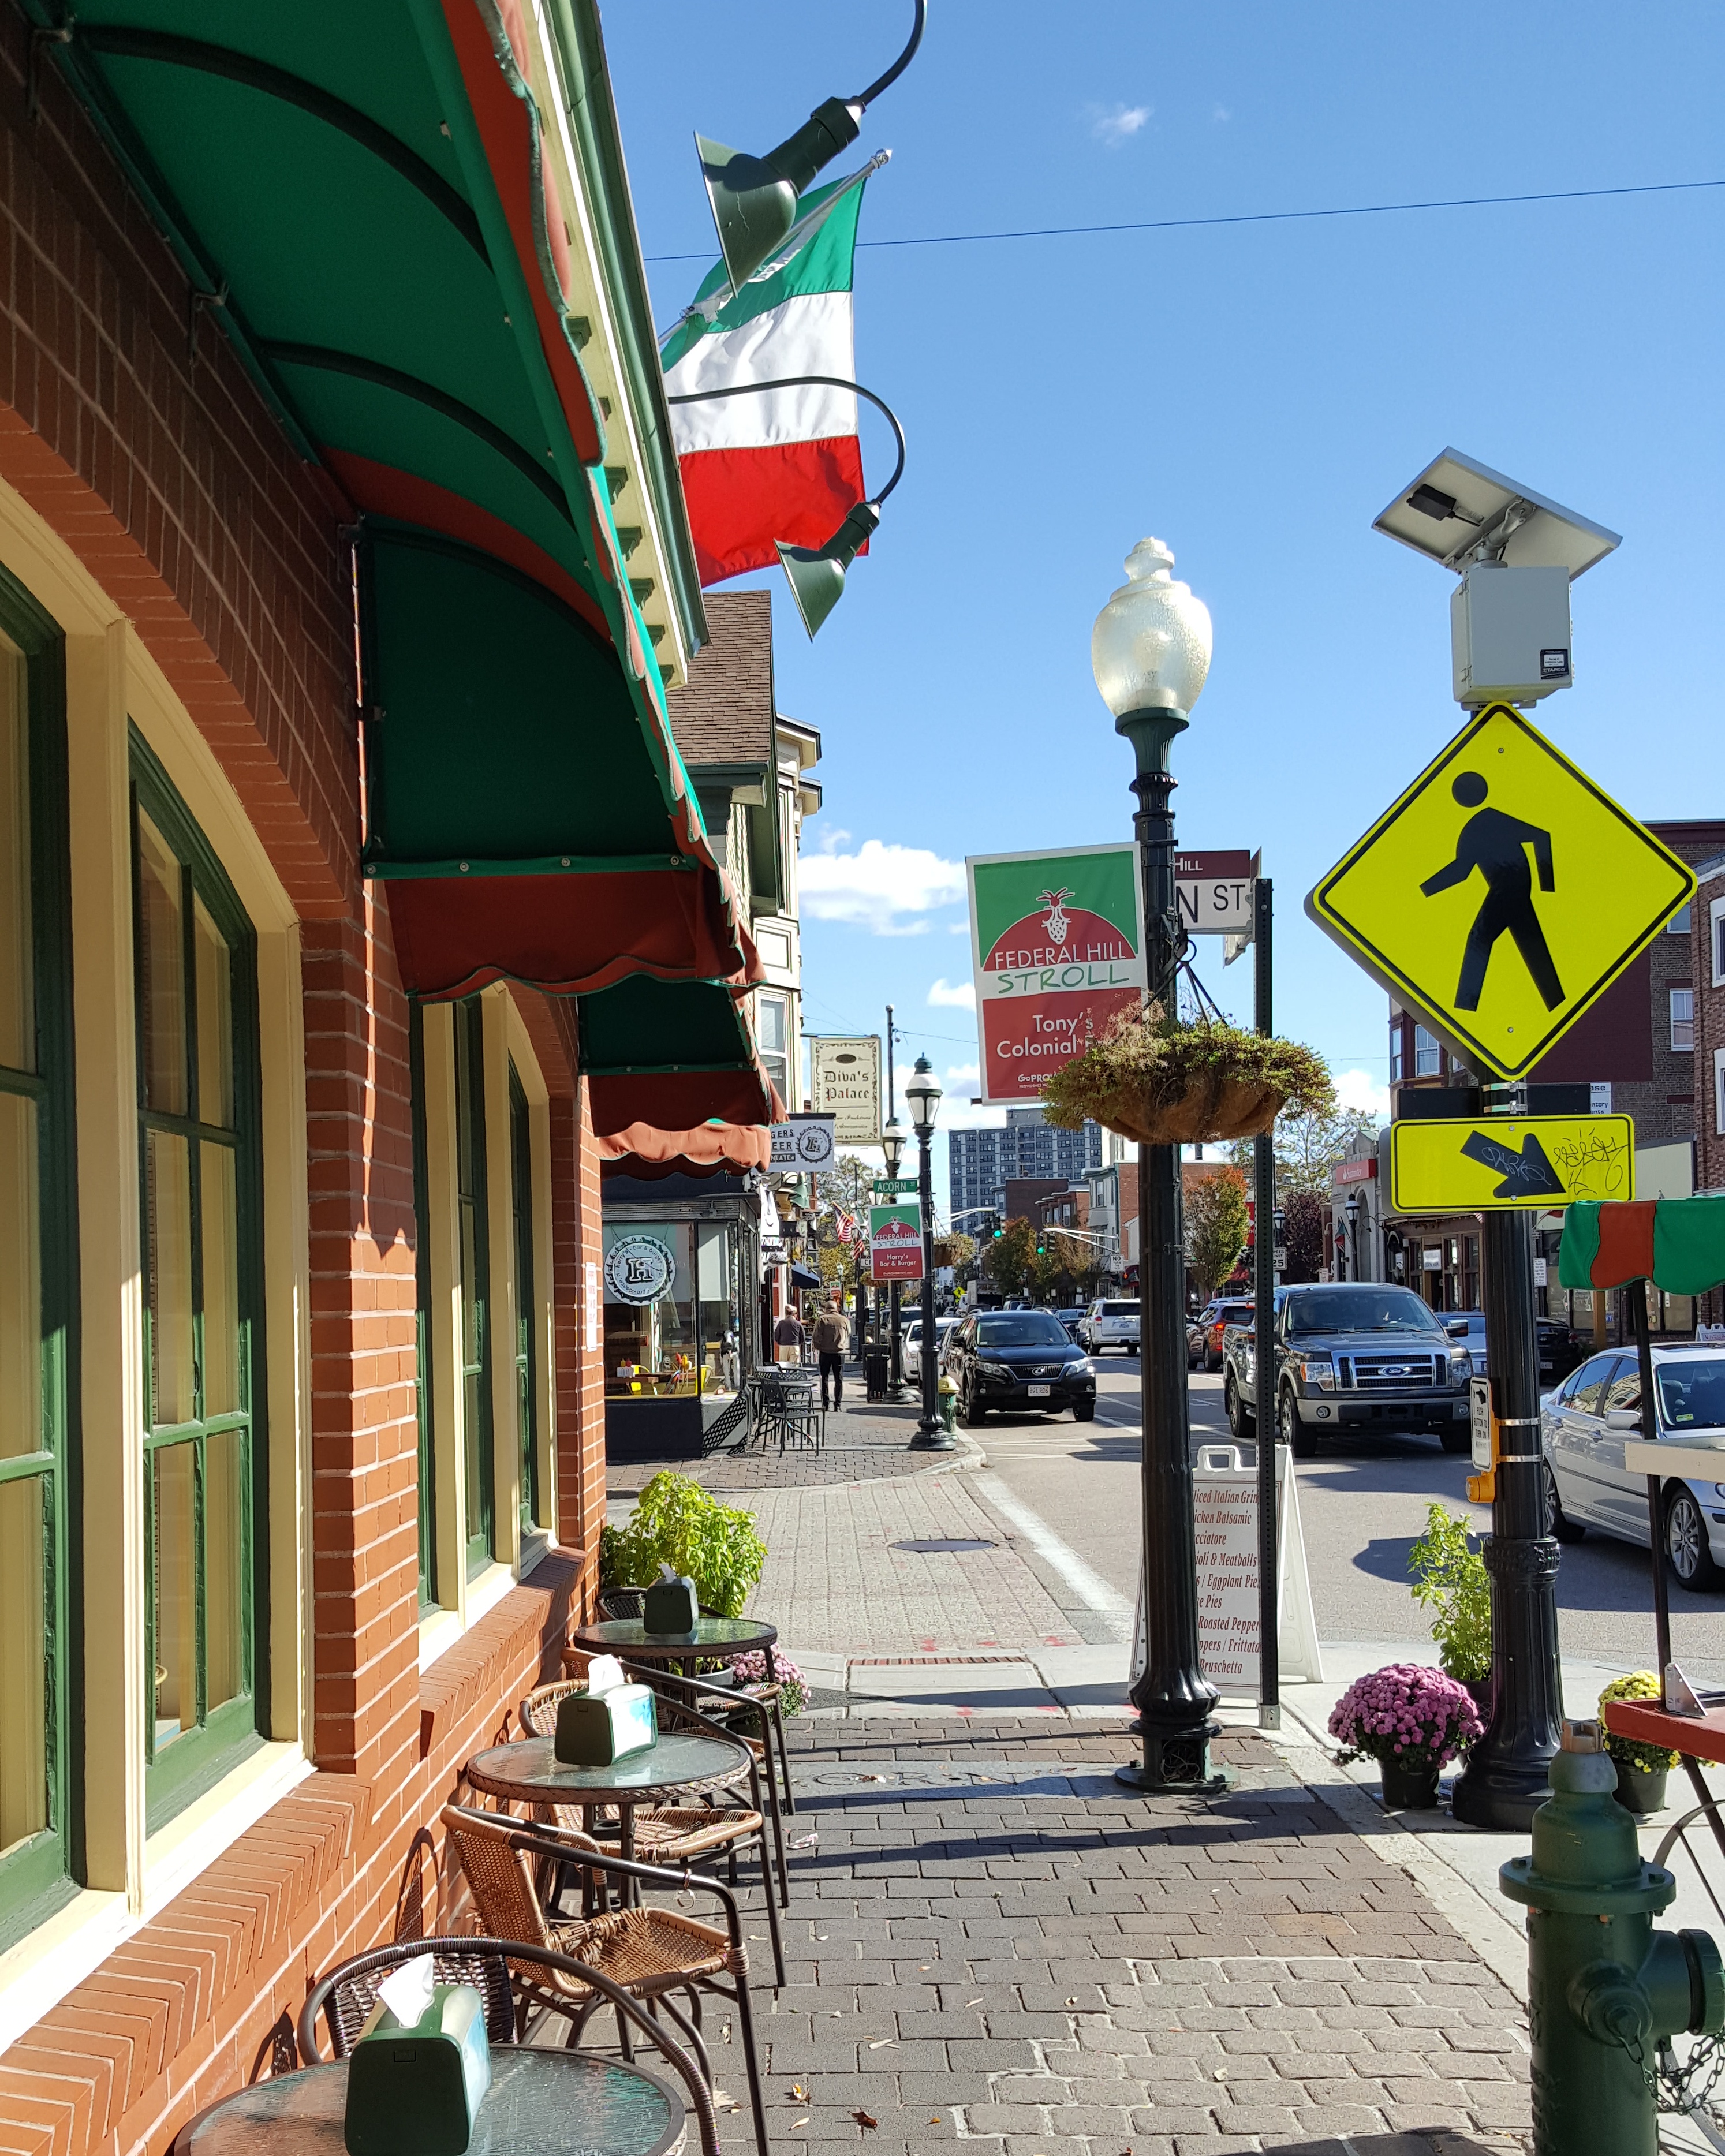 Italian vibe community and business in Providence - an experience included in The Italian Experience Tour.